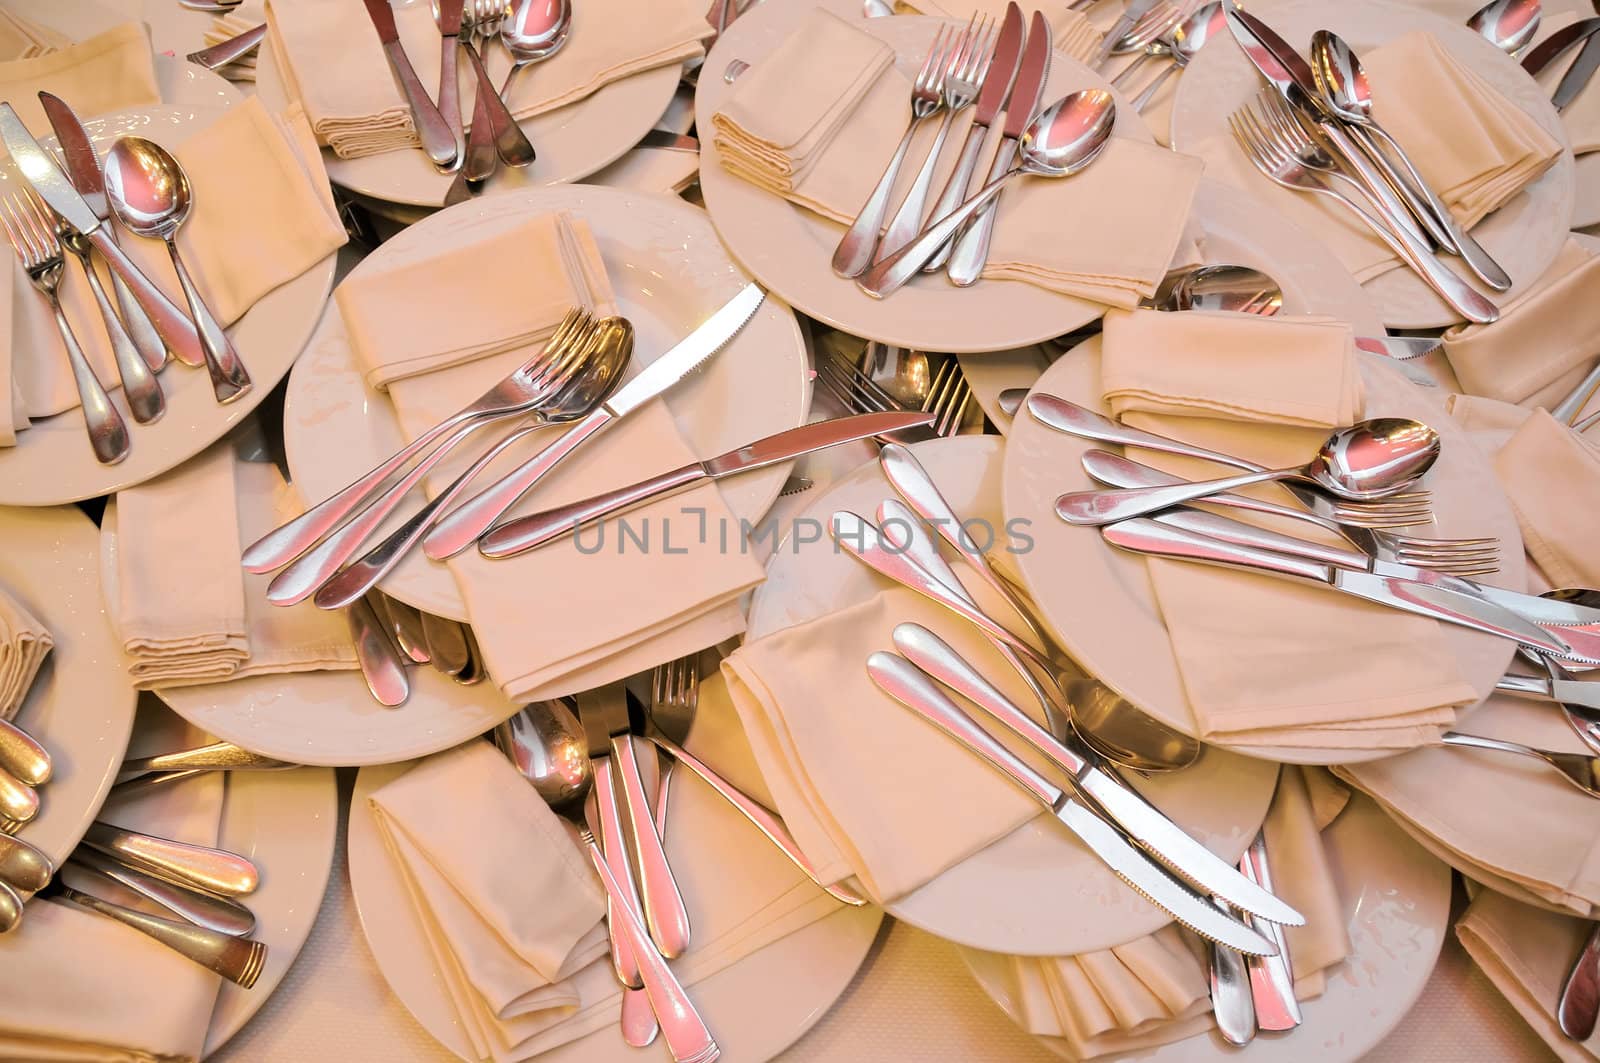 The heap of plates, steel forks, knifes, spoon and napkins